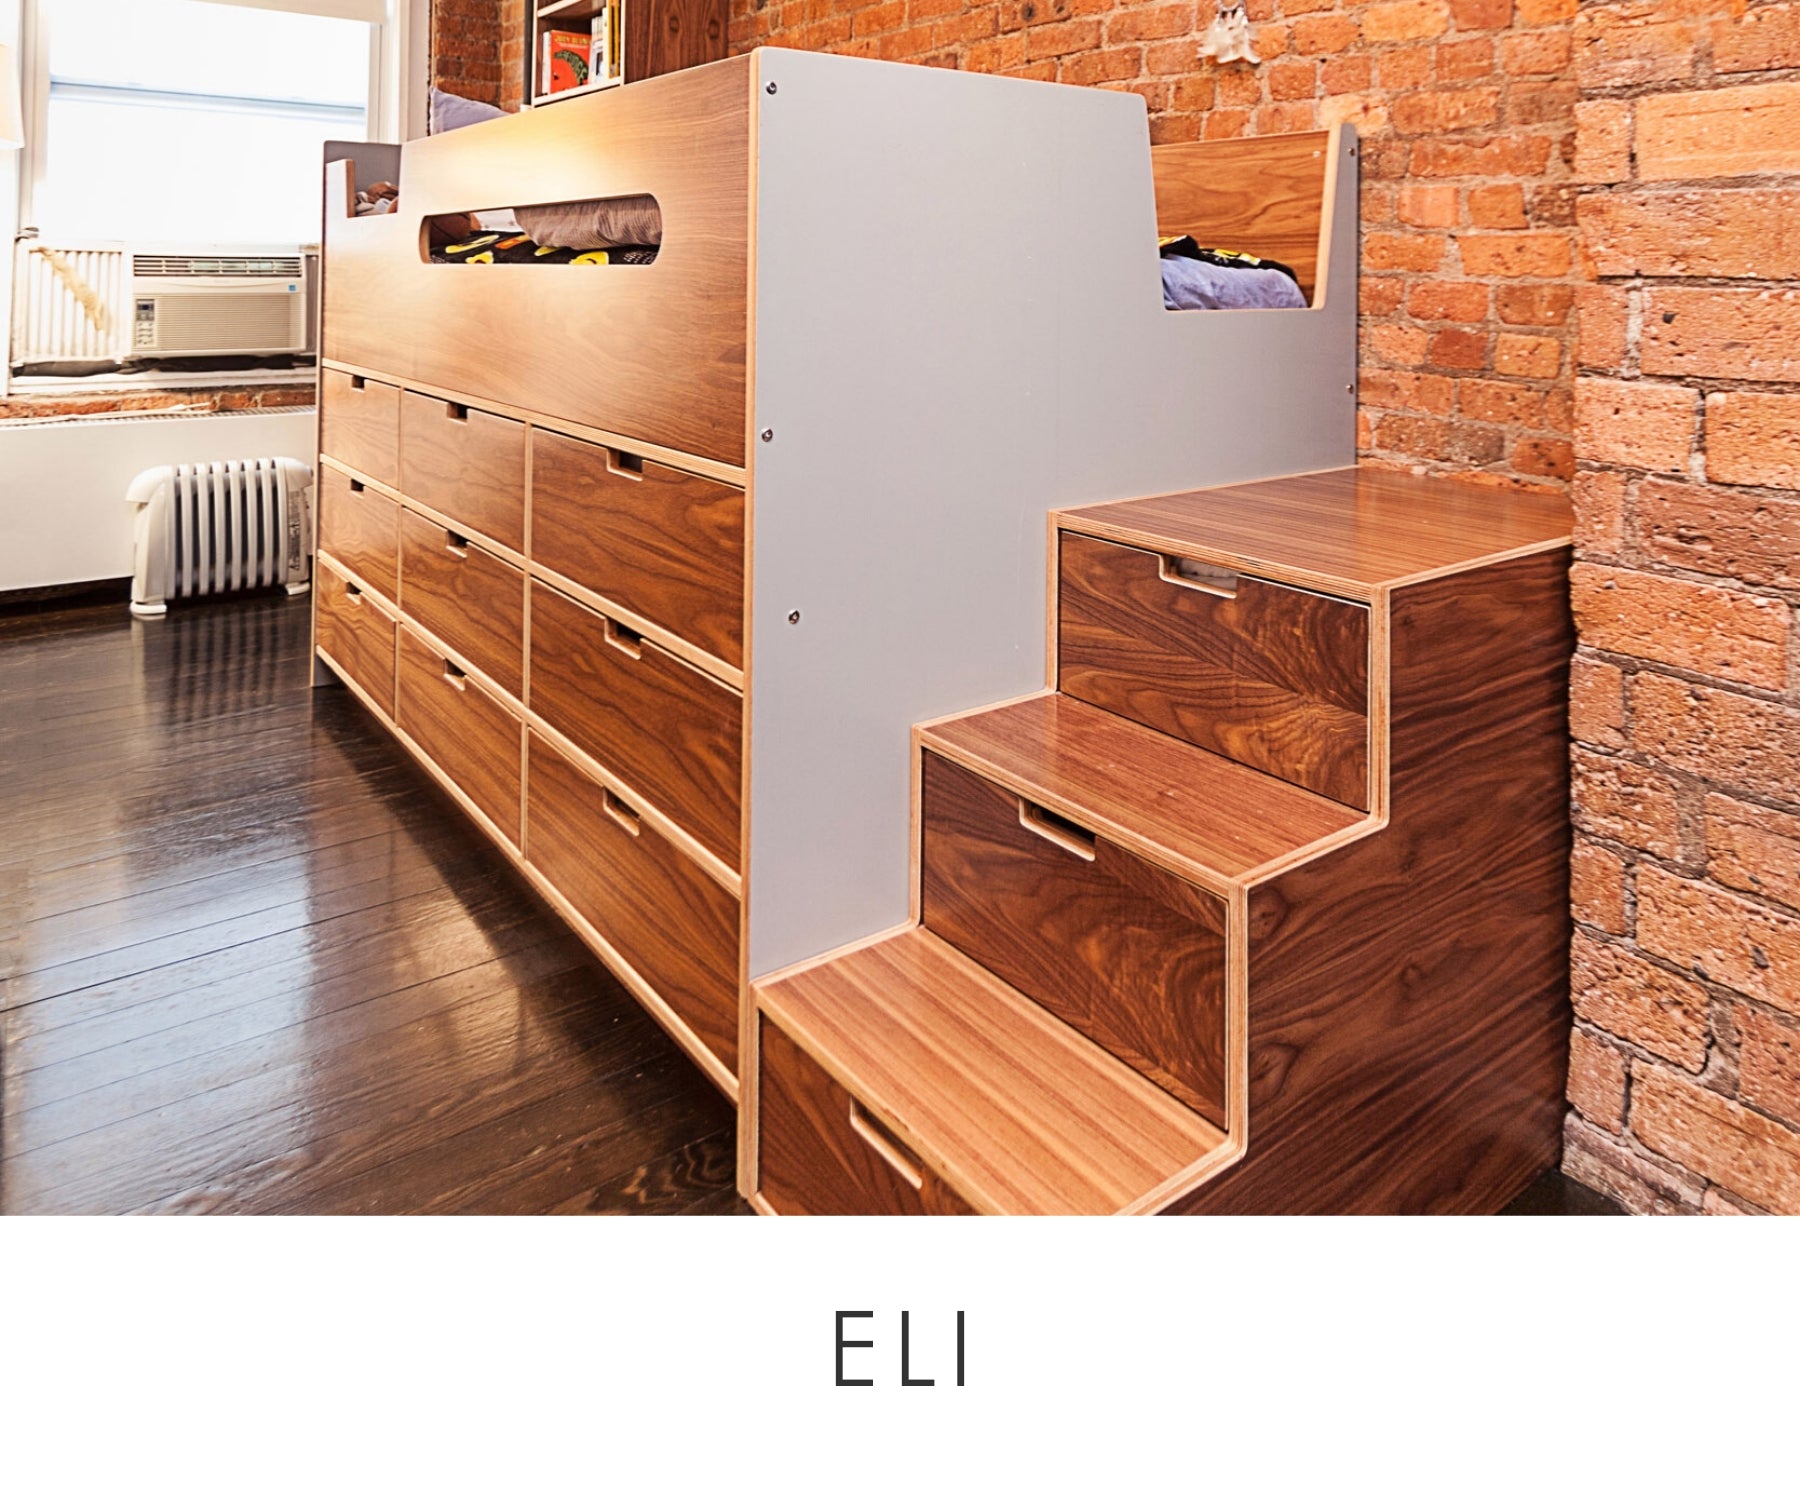 Eli room modern loft bed with wooden stairs and drawers, set against an exposed brick wall in a stylish room.